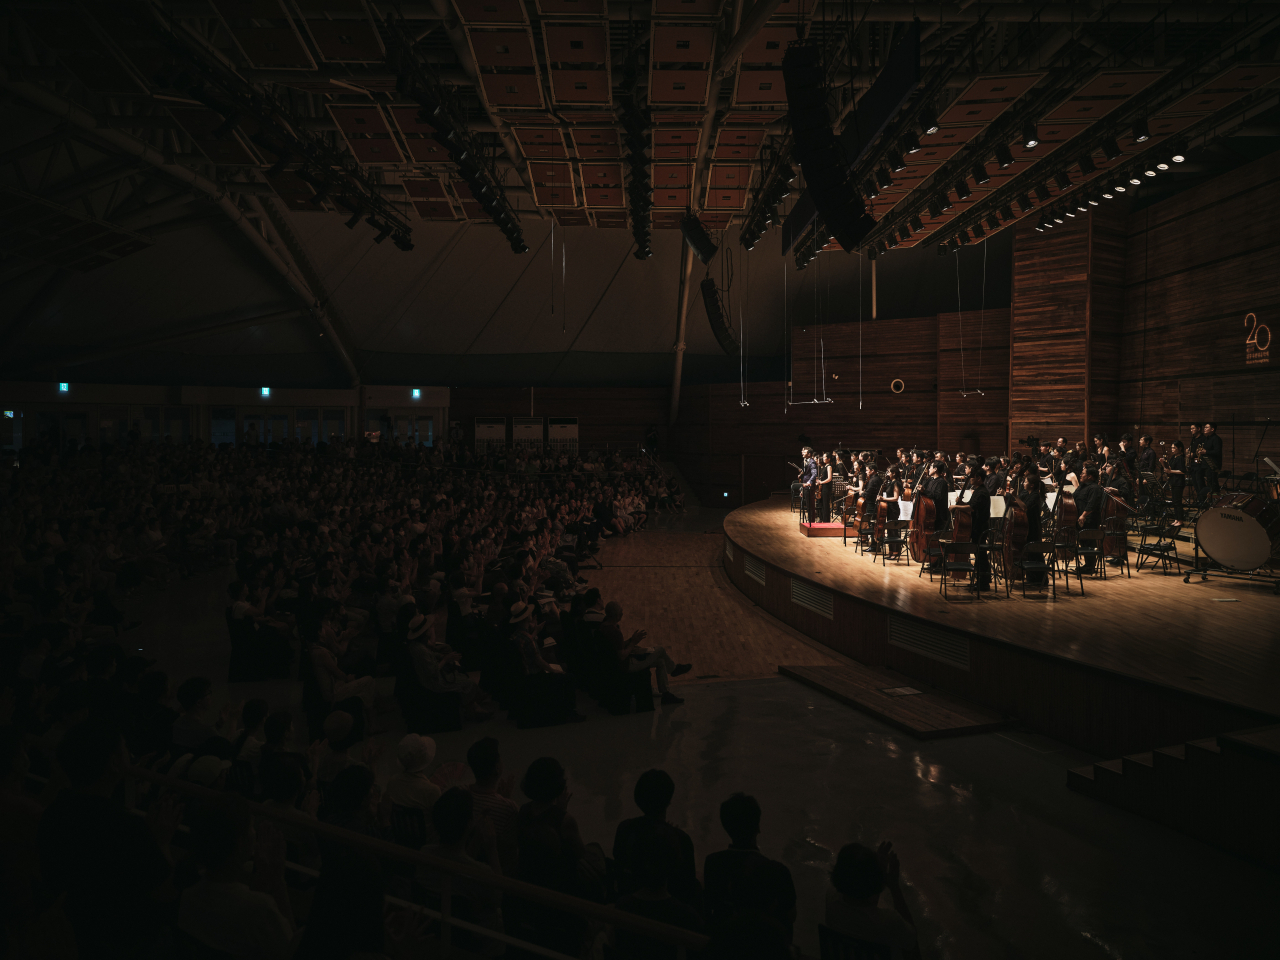 The PyeongChang Festival Orchestra greets the audience after Music in PyeongChang's closing concert in the Music Tent in Pyeongchang, Gangwon Province on Aug. 5, 2023. (Gangwon Art and Culture Foundation)